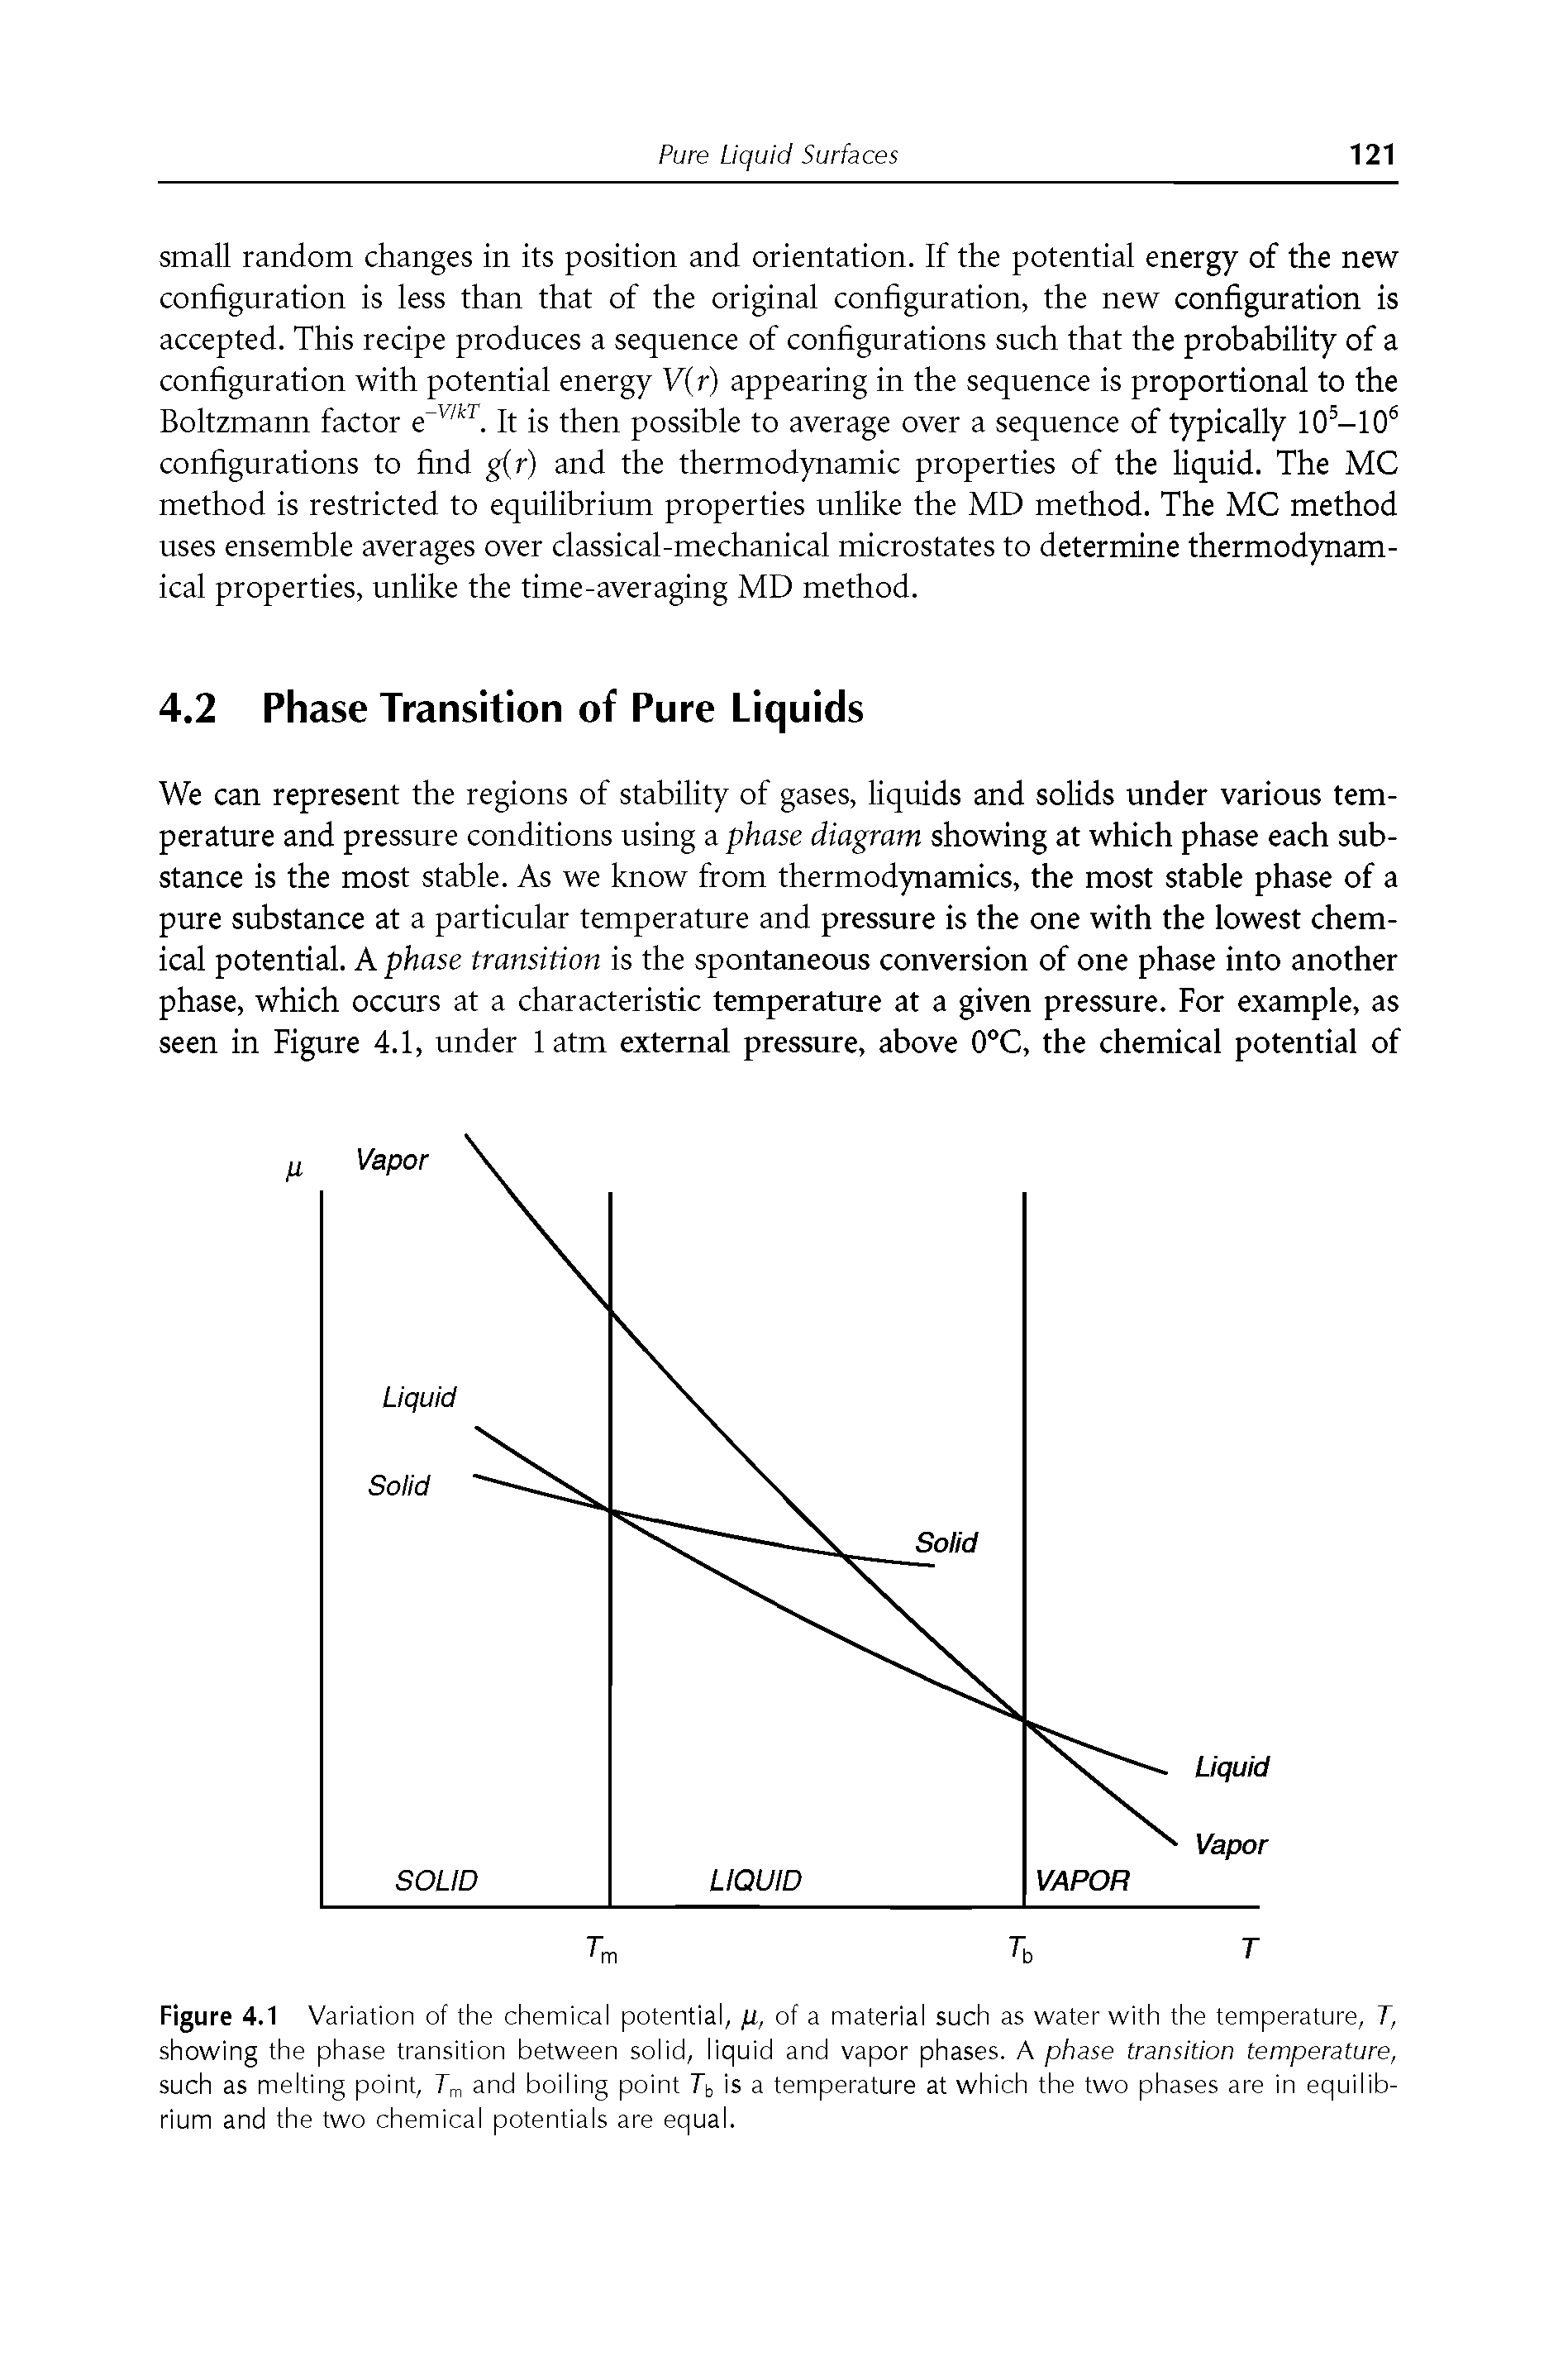 Figure 4.1 Variation of the chemical potential, p, of a material such as water with the temperature, 7, showing the phase transition between solid, liquid and vapor phases. A phase transition temperature, such as melting point, 7m and boiling point 7b is a temperature at which the two phases are in equilibrium and the two chemical potentials are equal.